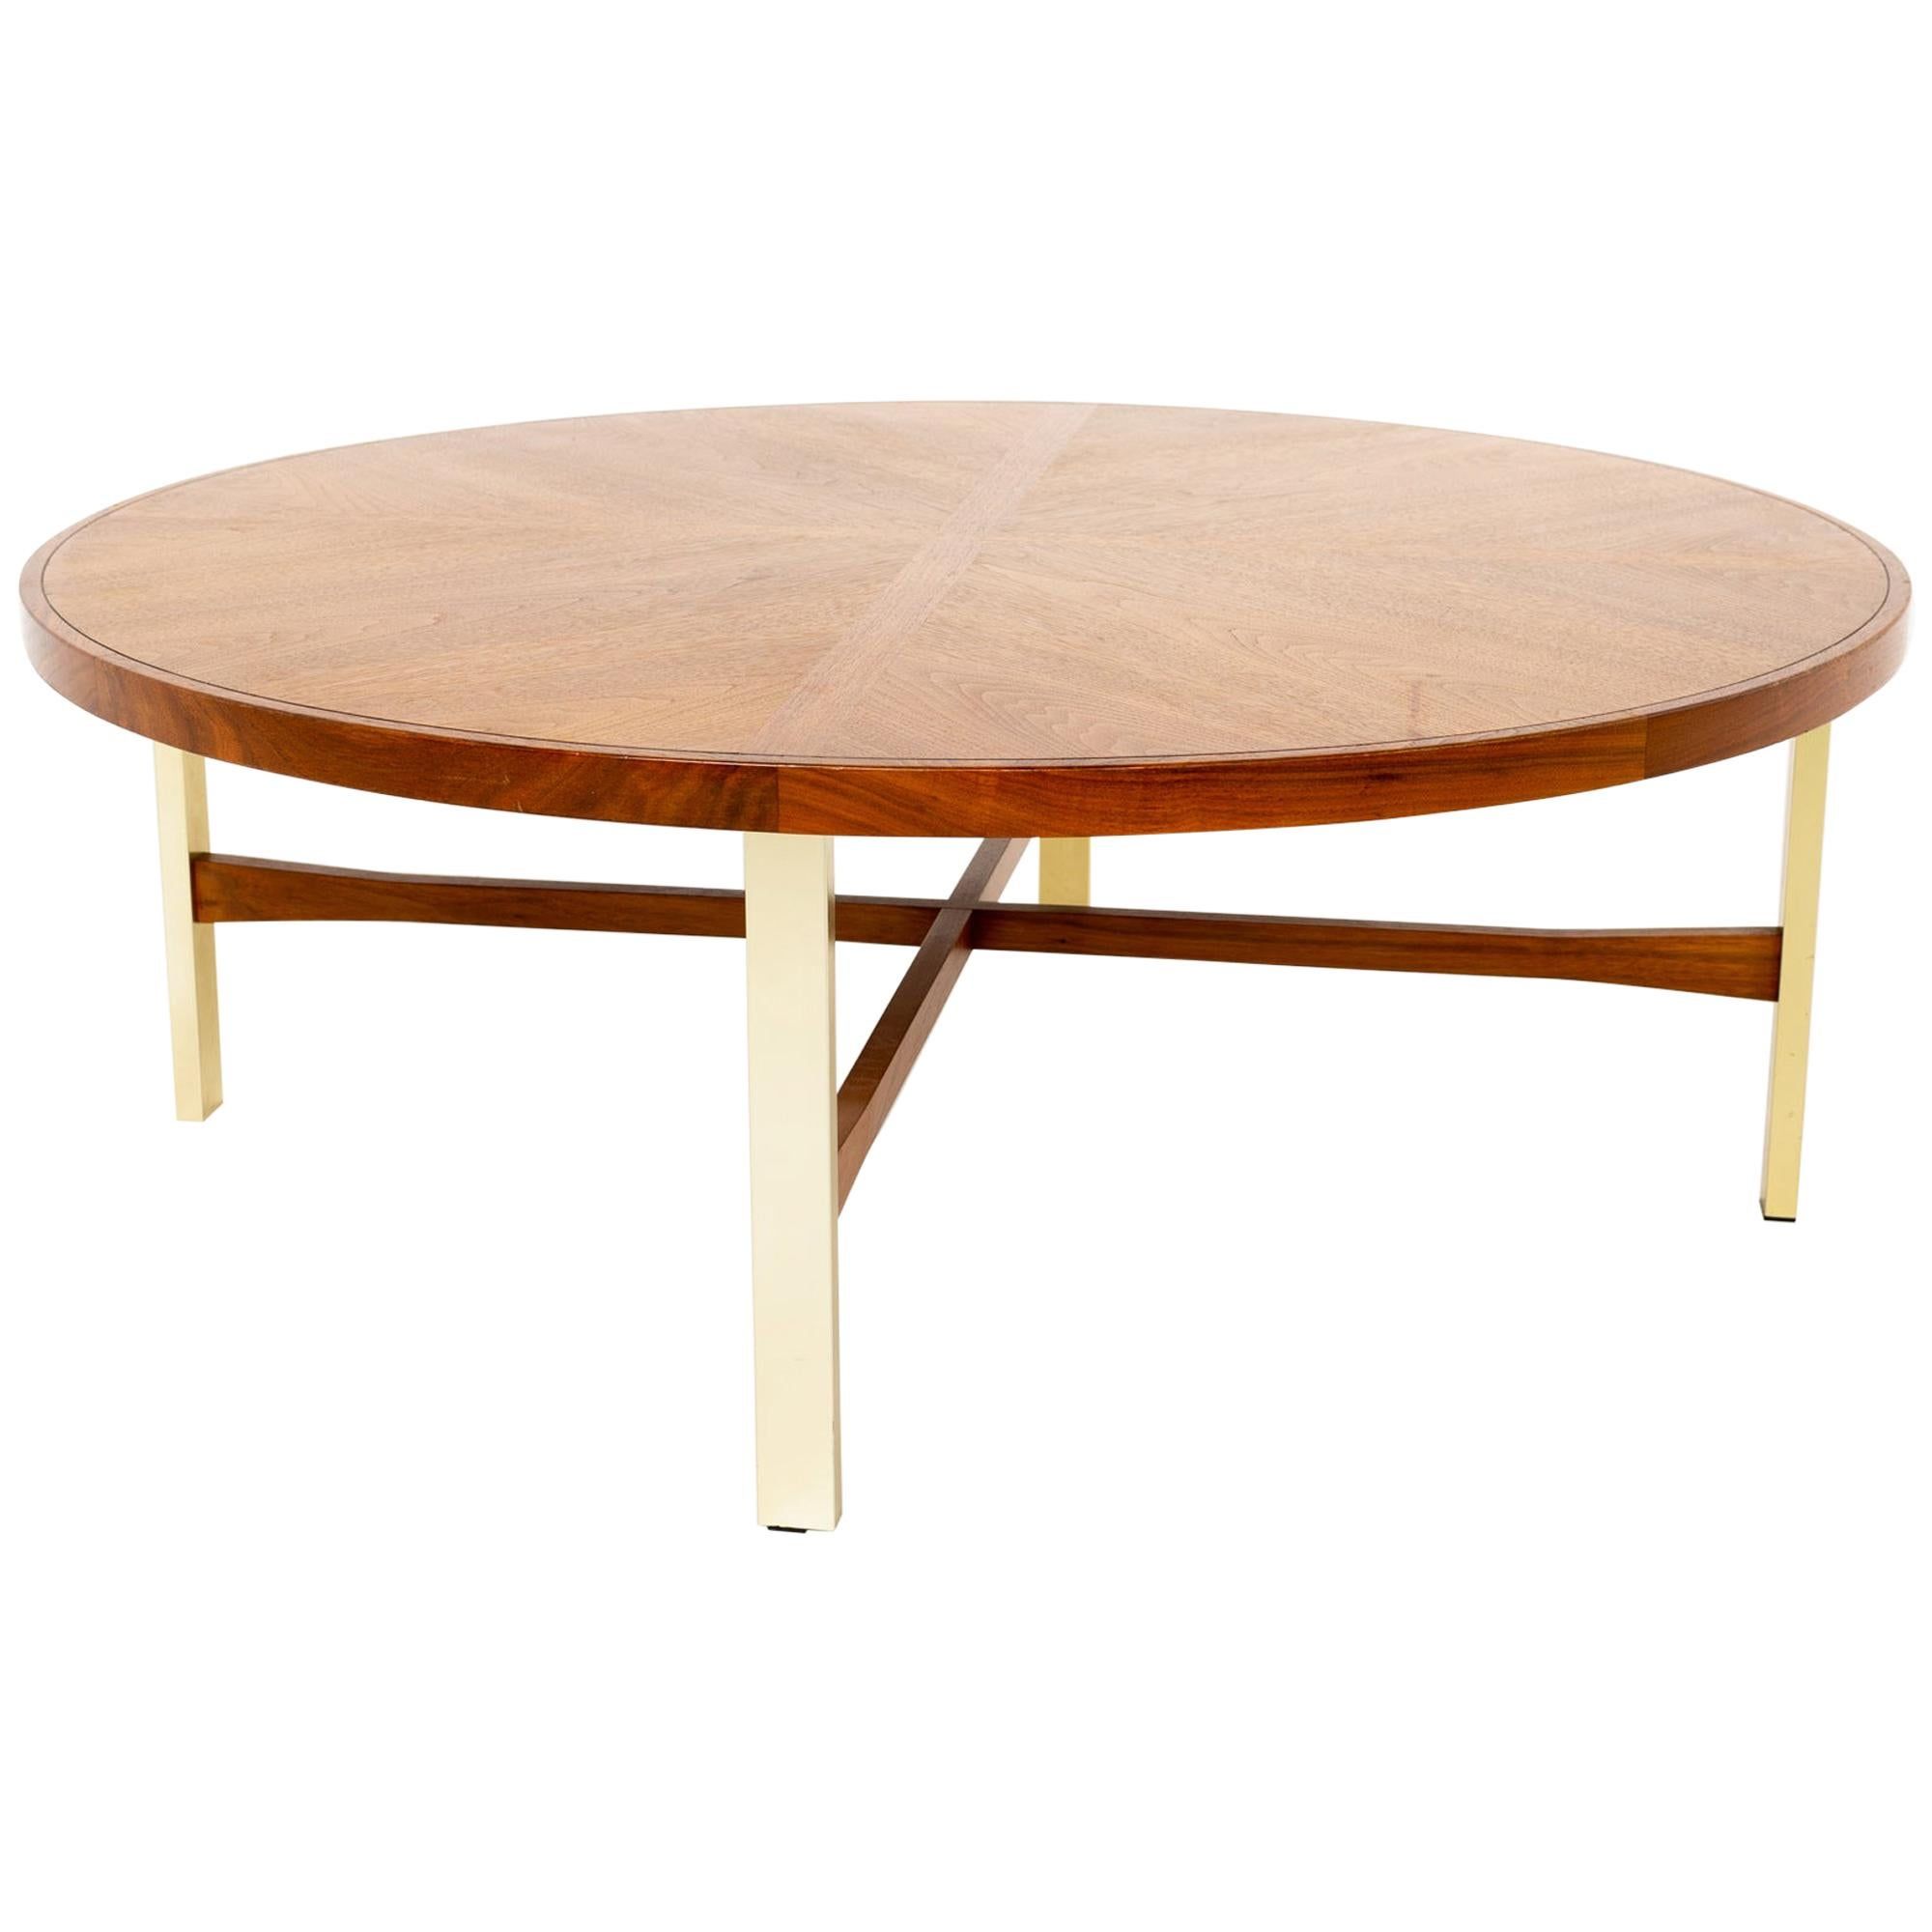 Drexel Heritage Mid Century Walnut And Brass Round Coffee Table At 1stdibs With American Heritage Round Coffee Tables (Gallery 5 of 20)